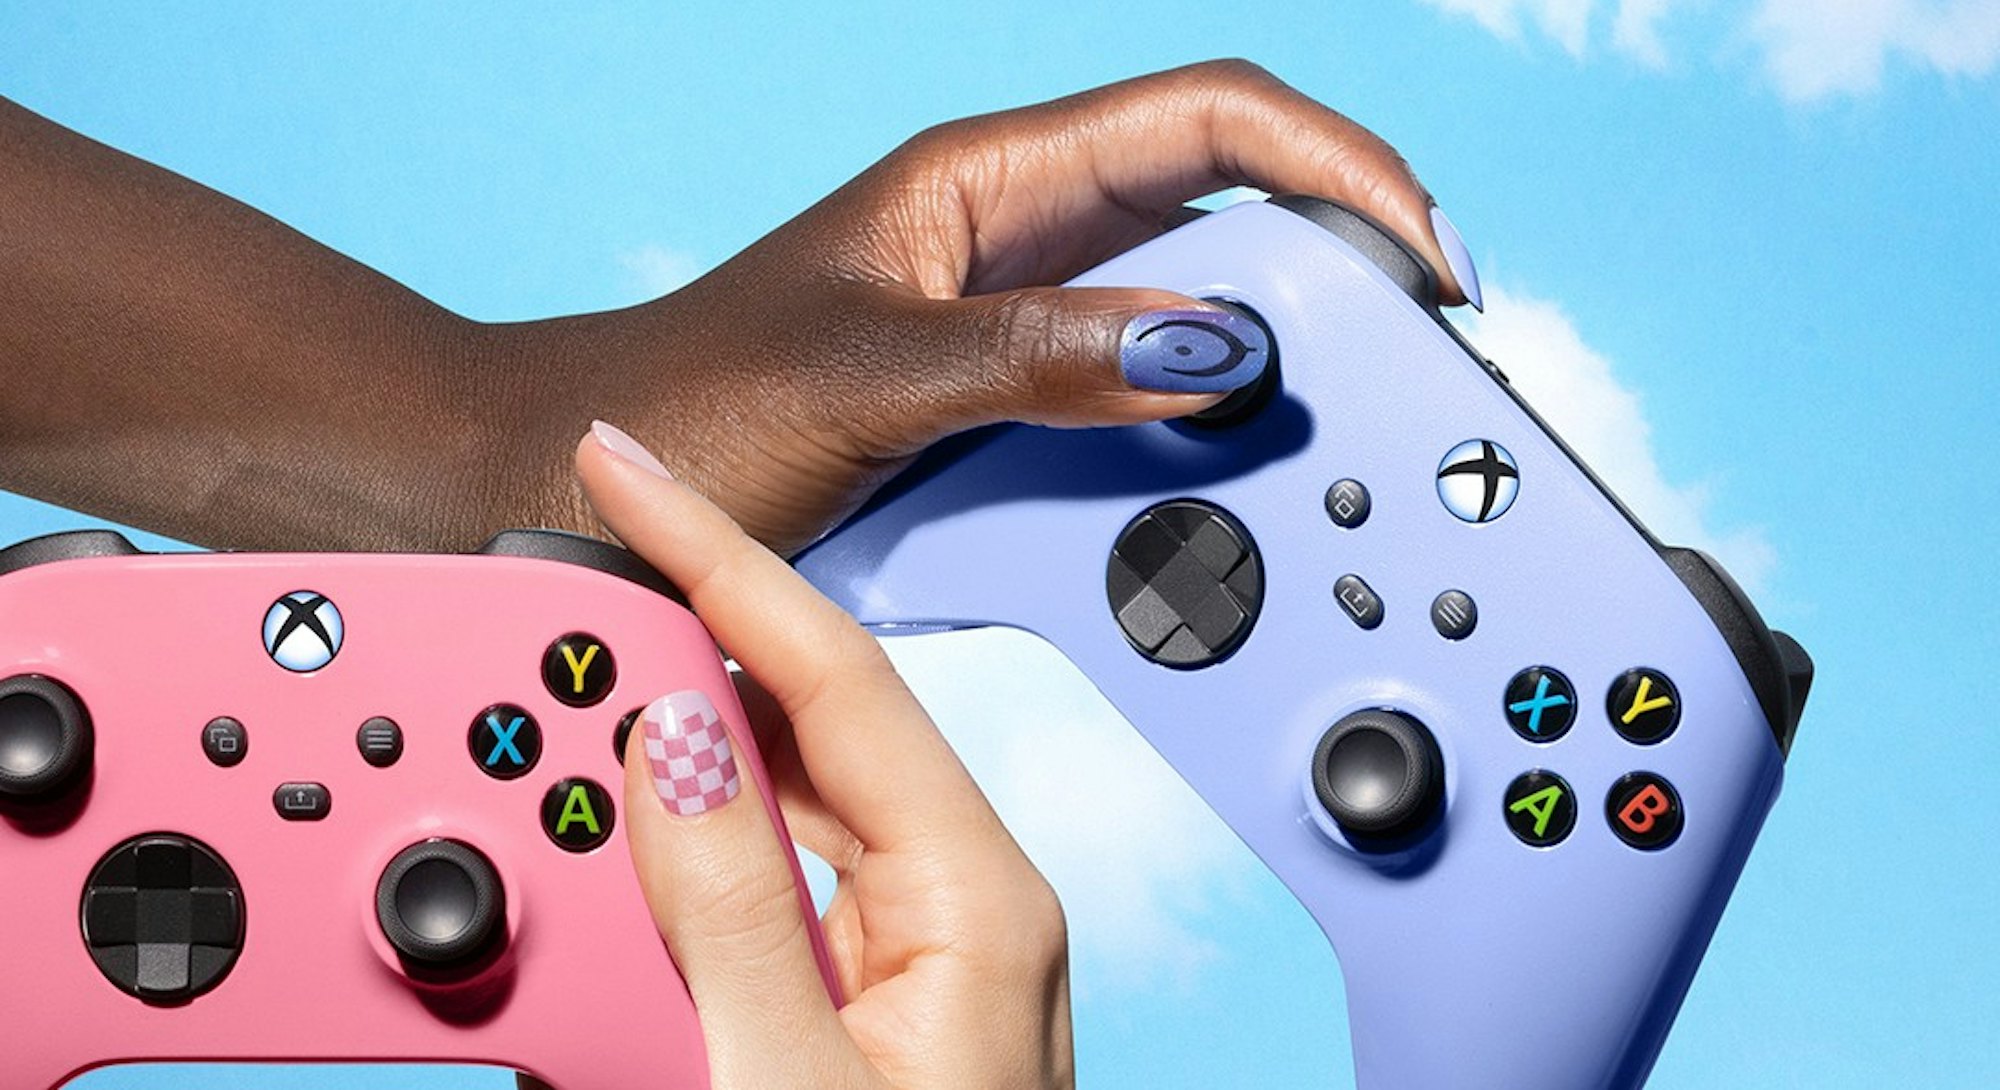 hands with nail polish holding Xbox controllers